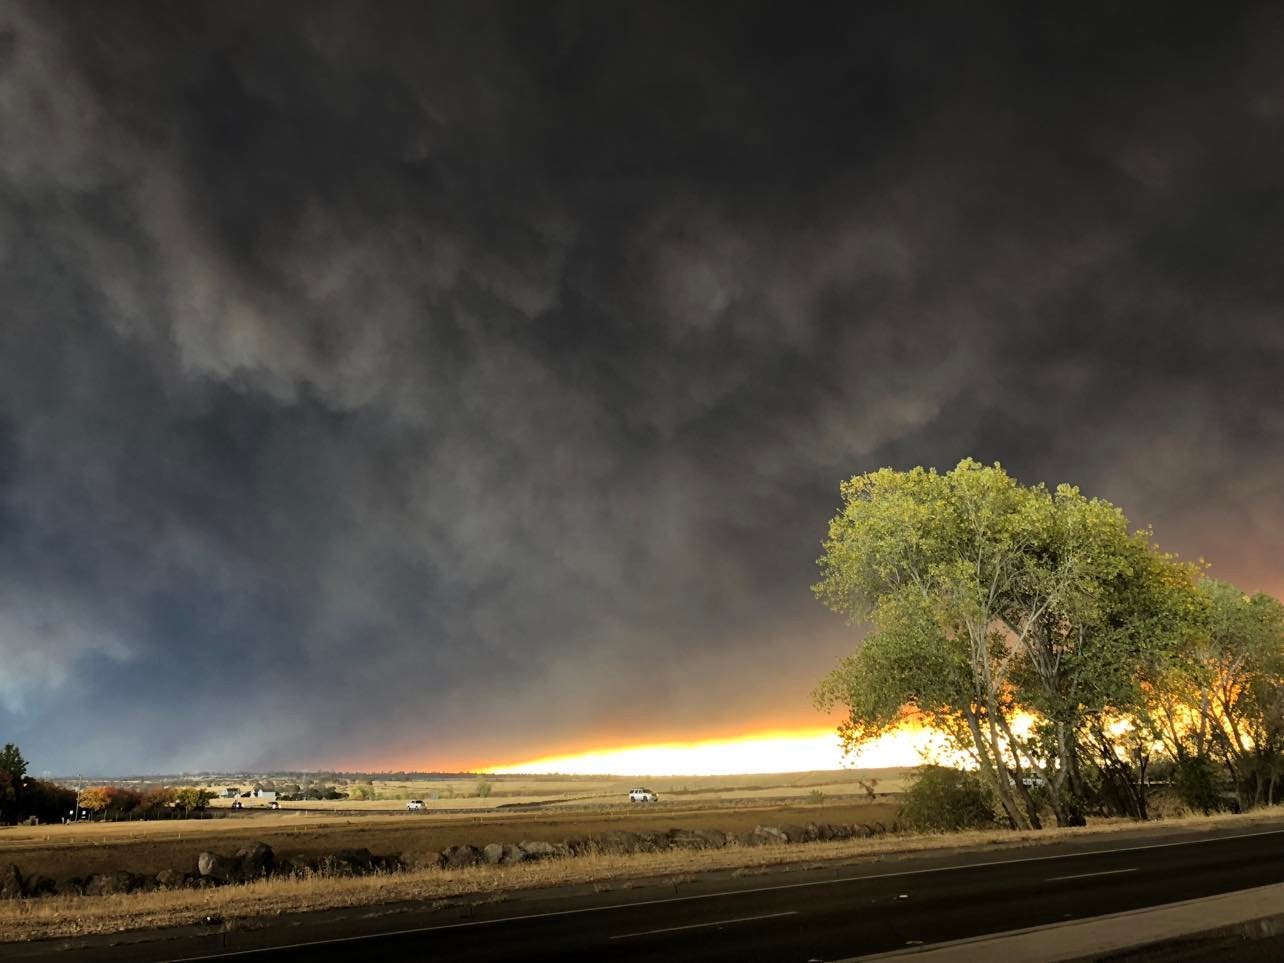 Dark smoke covers the sky of wide expanse of land with a highway in the foreground and vehicles off in the distance.  There is a bright blaze of a fire on the horizon.